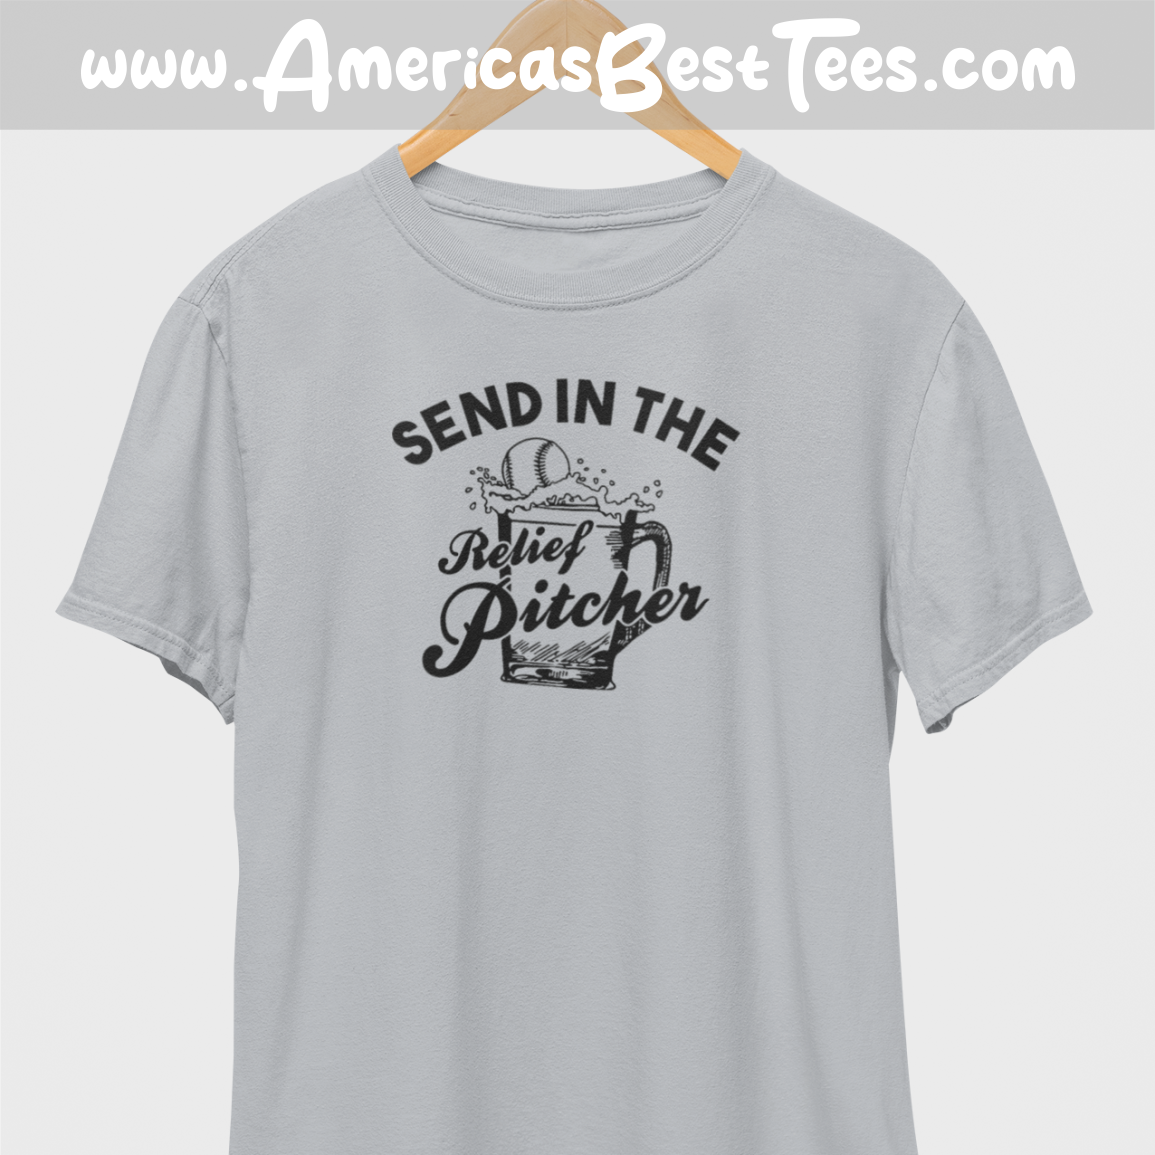 Send In The Relief Pitcher Black Print T-Shirt